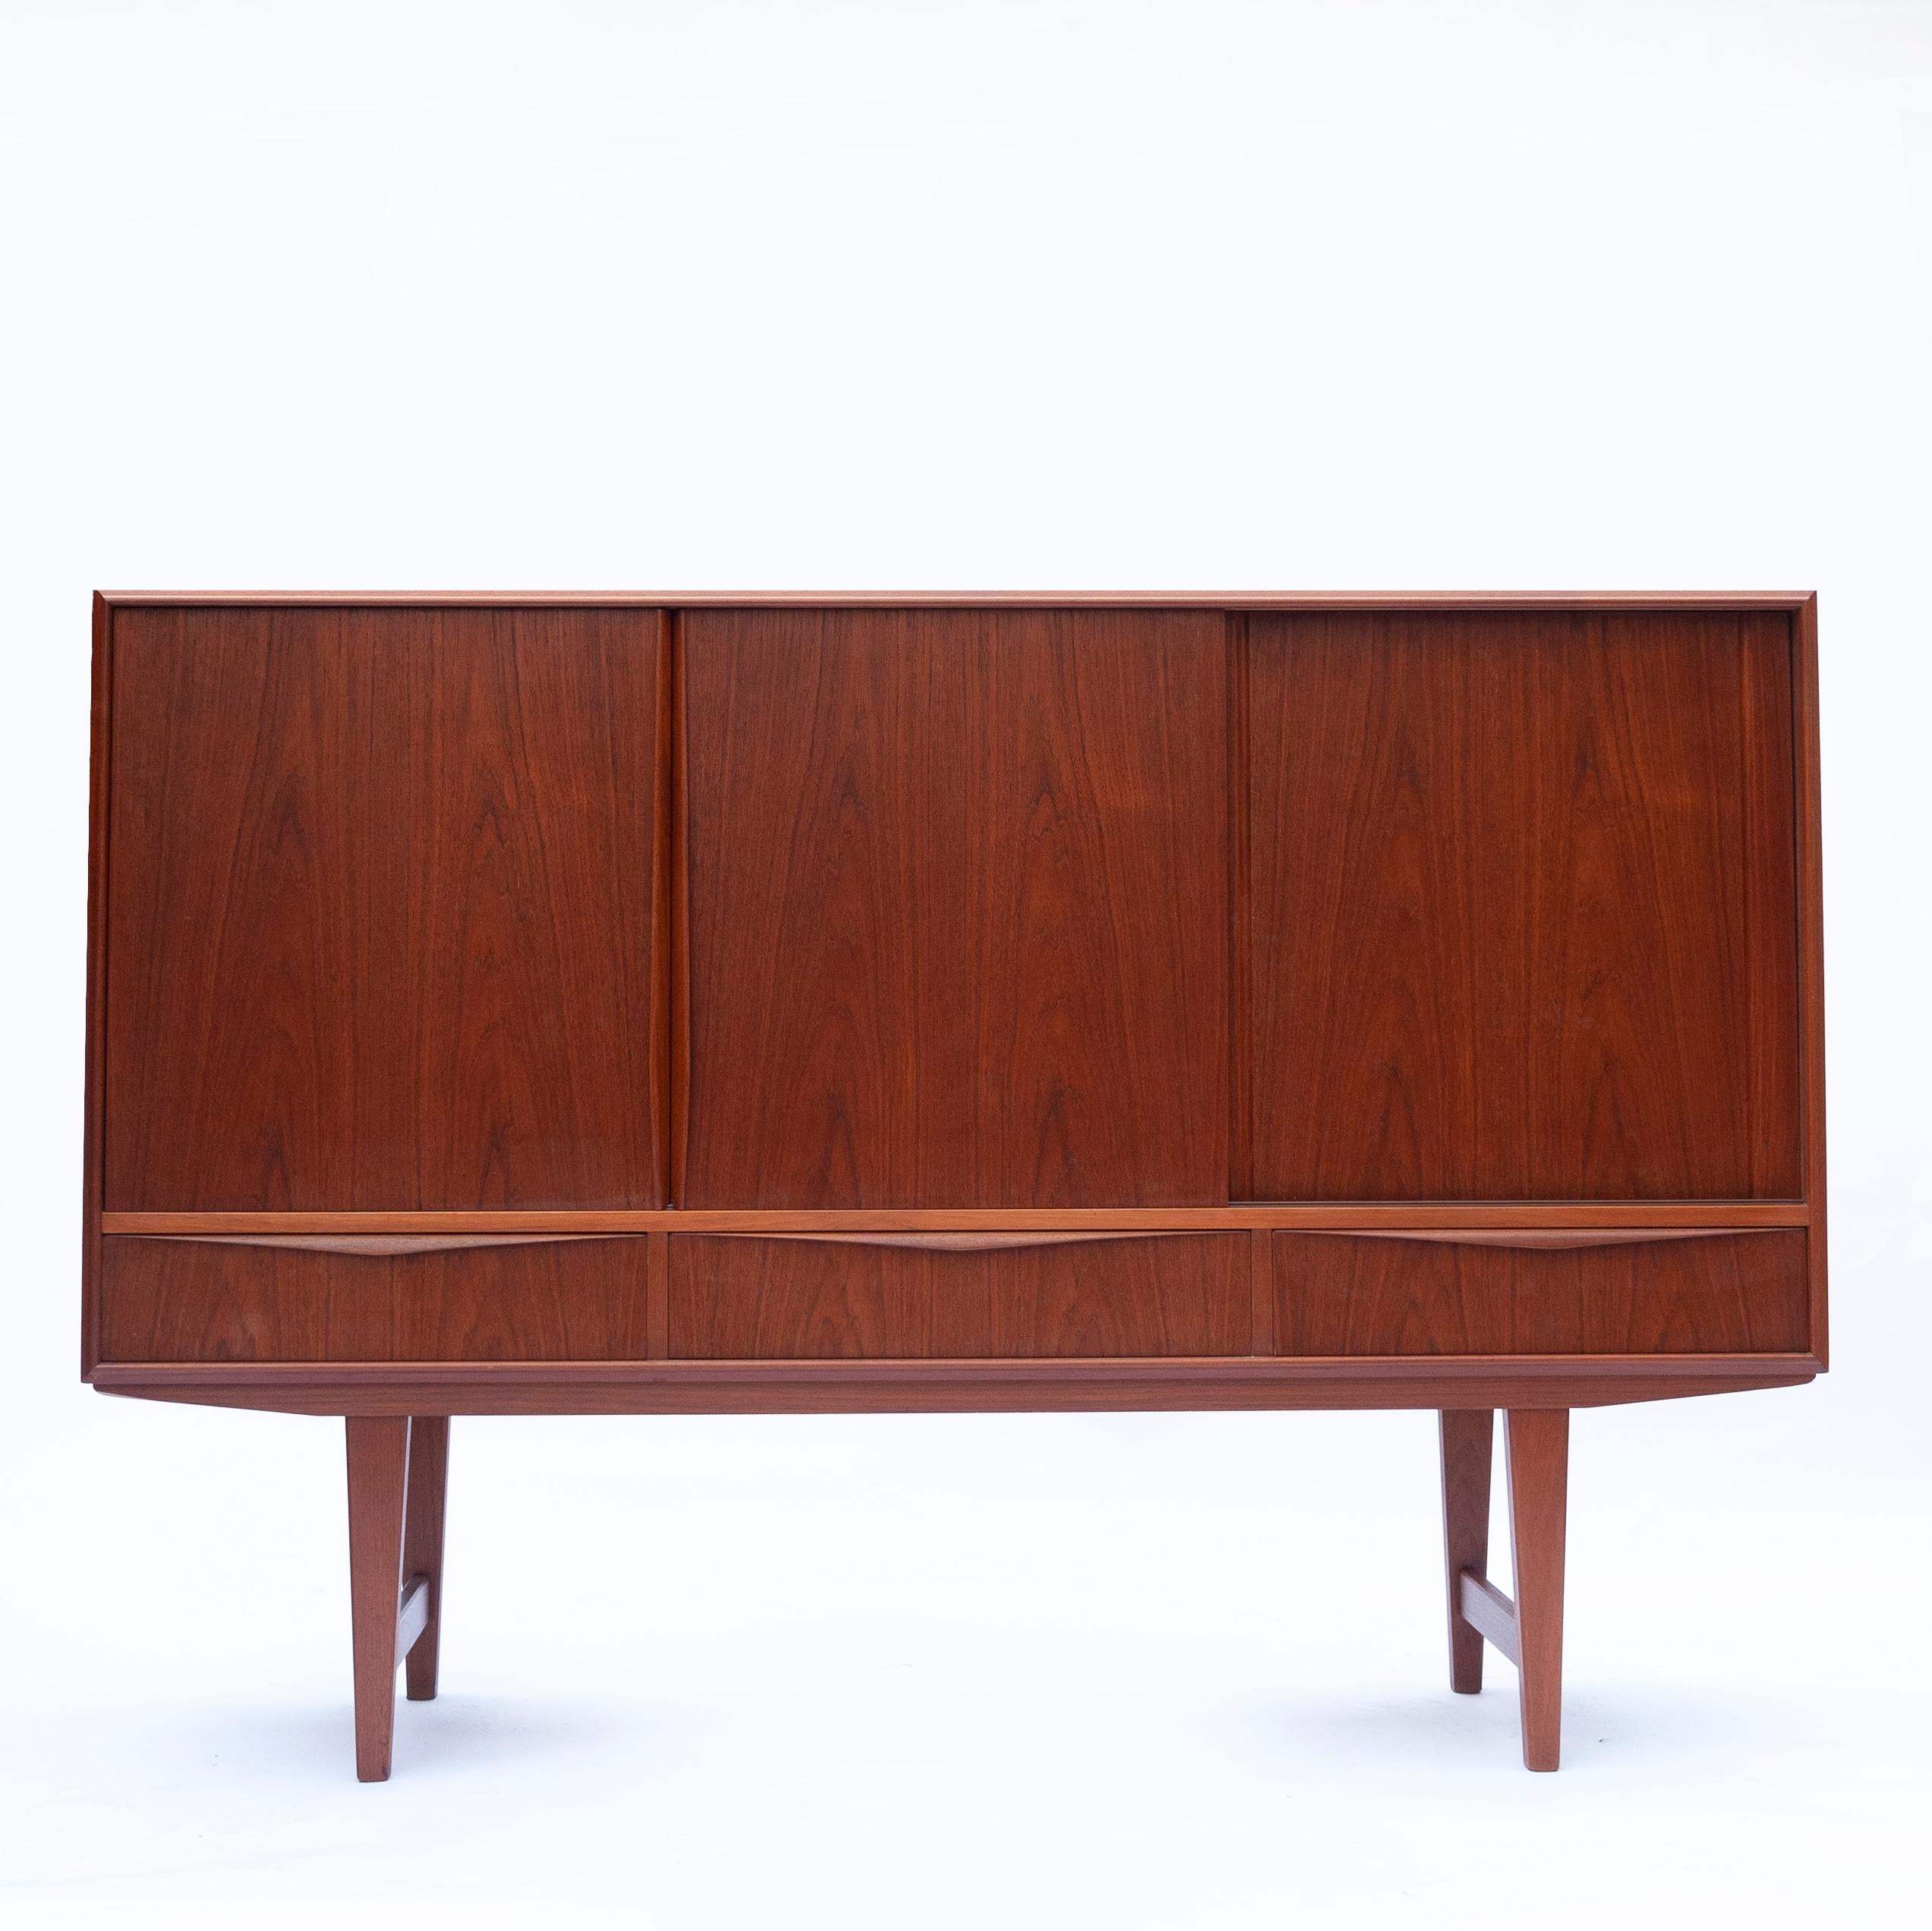 Mid-20th Century Danish Teak Sideboard by E W Bach for Sejling Skabe, 1960s For Sale